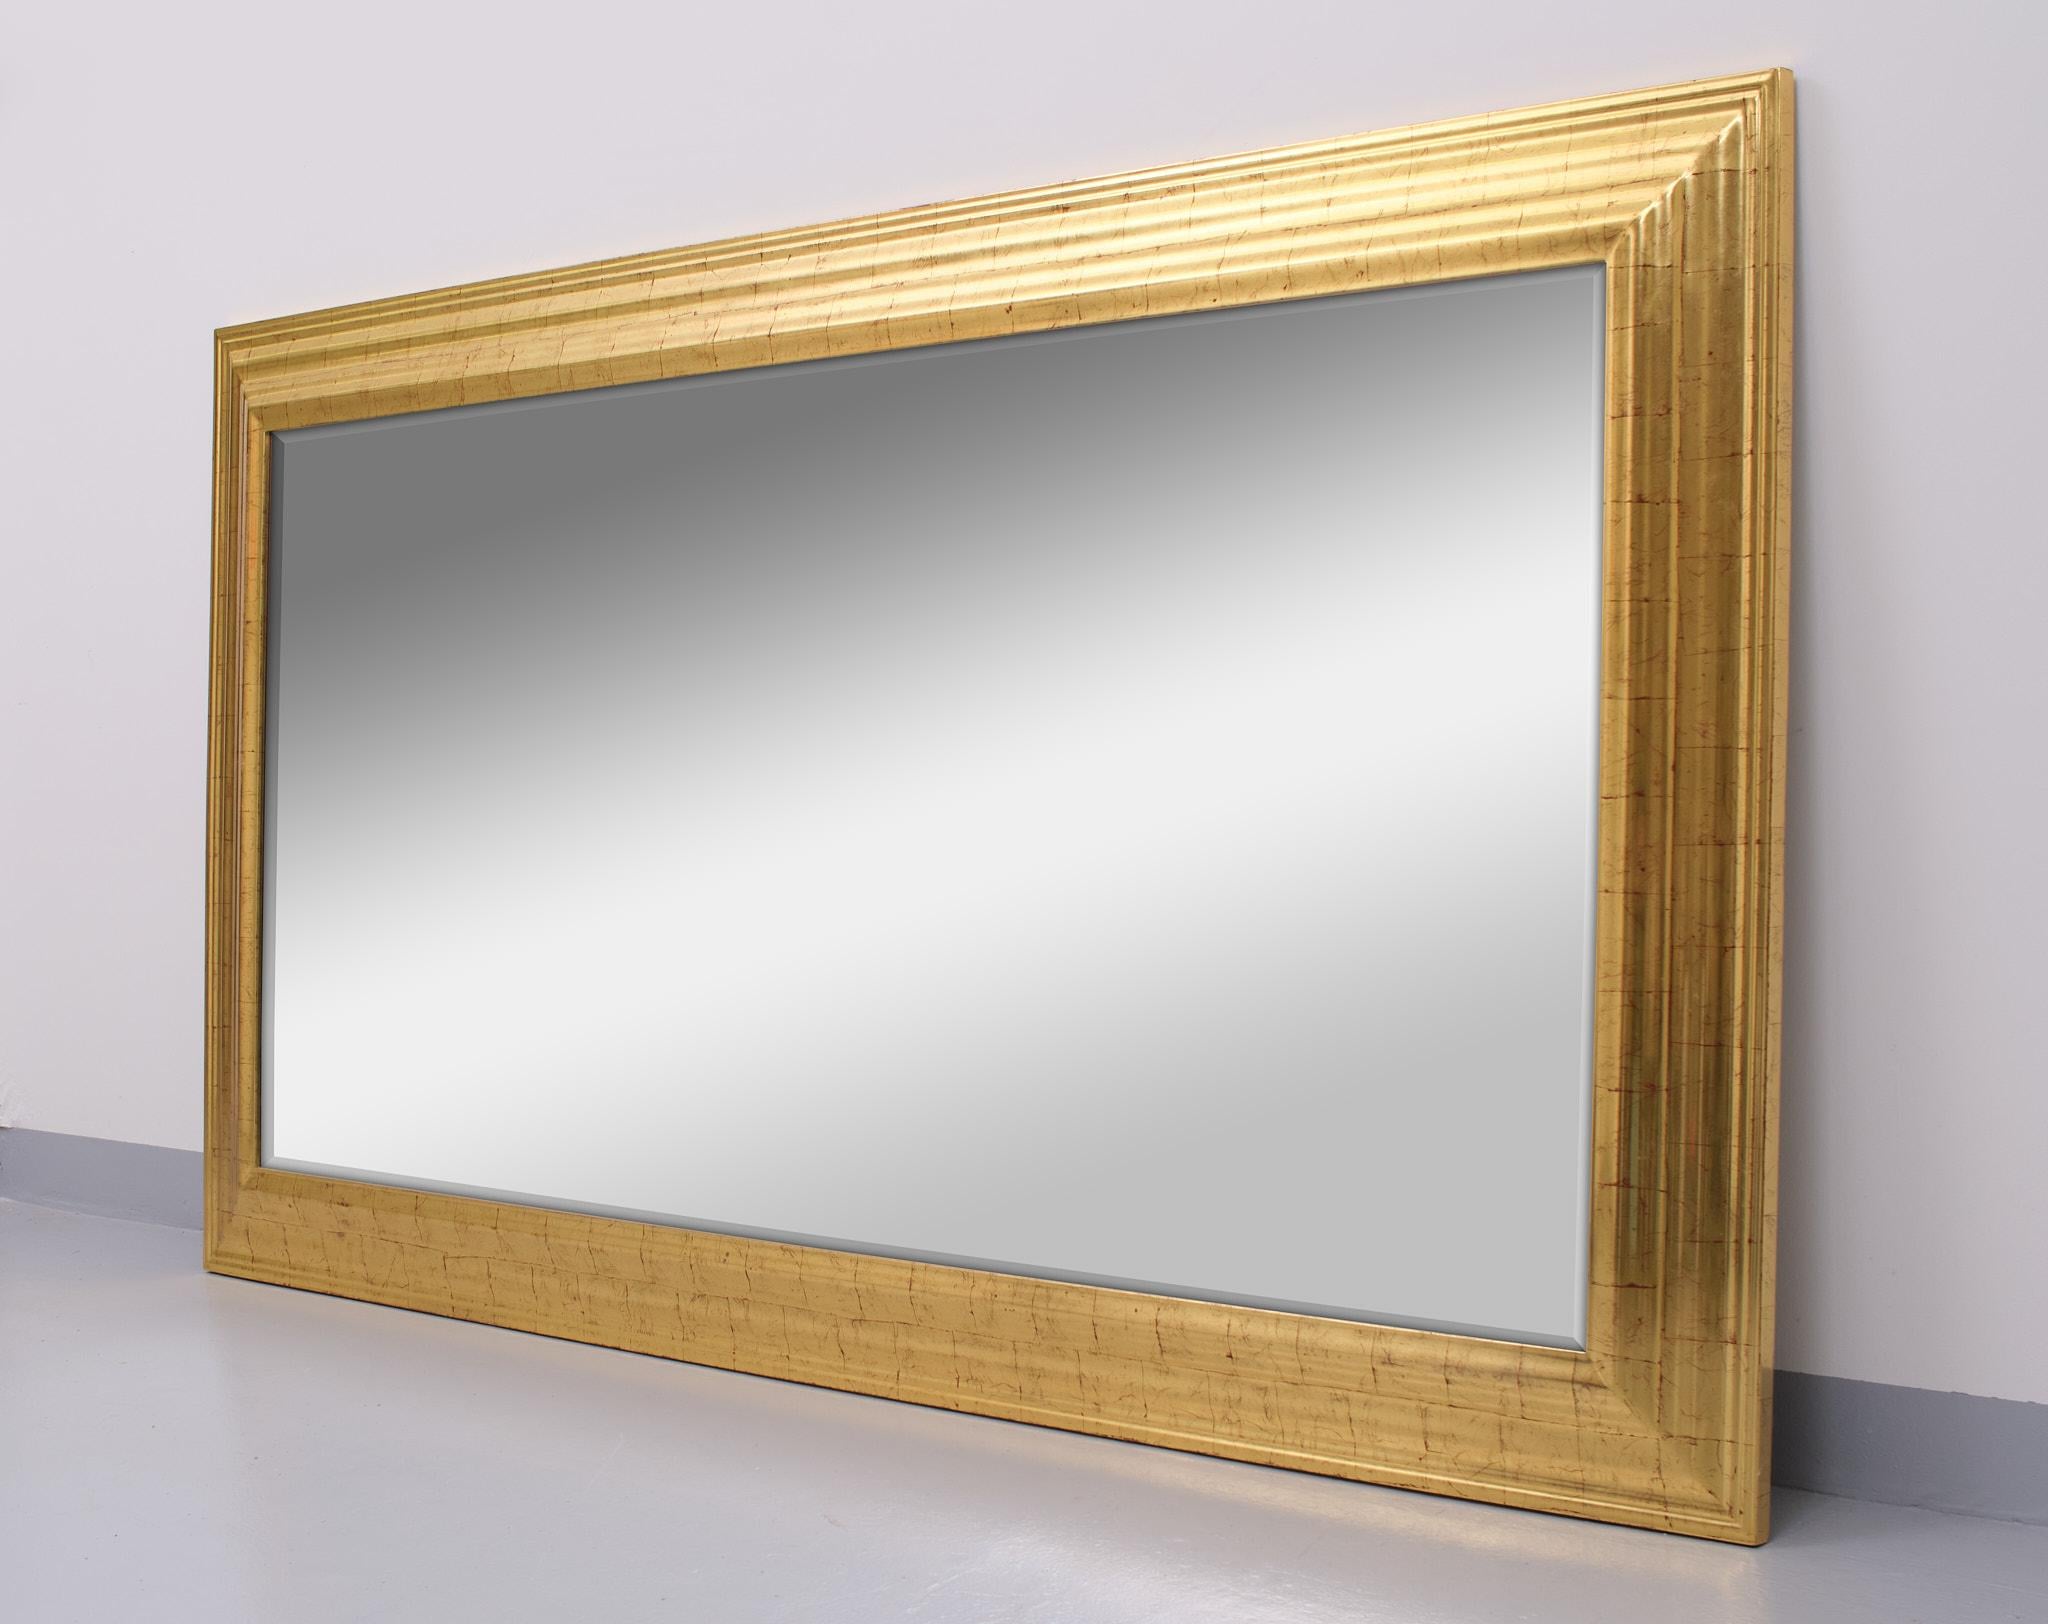 Unique large wall mirror. Can be used vertical ore horizontal.
Gold plated on wood frame. Beveled mirror. Signed. Good condition.